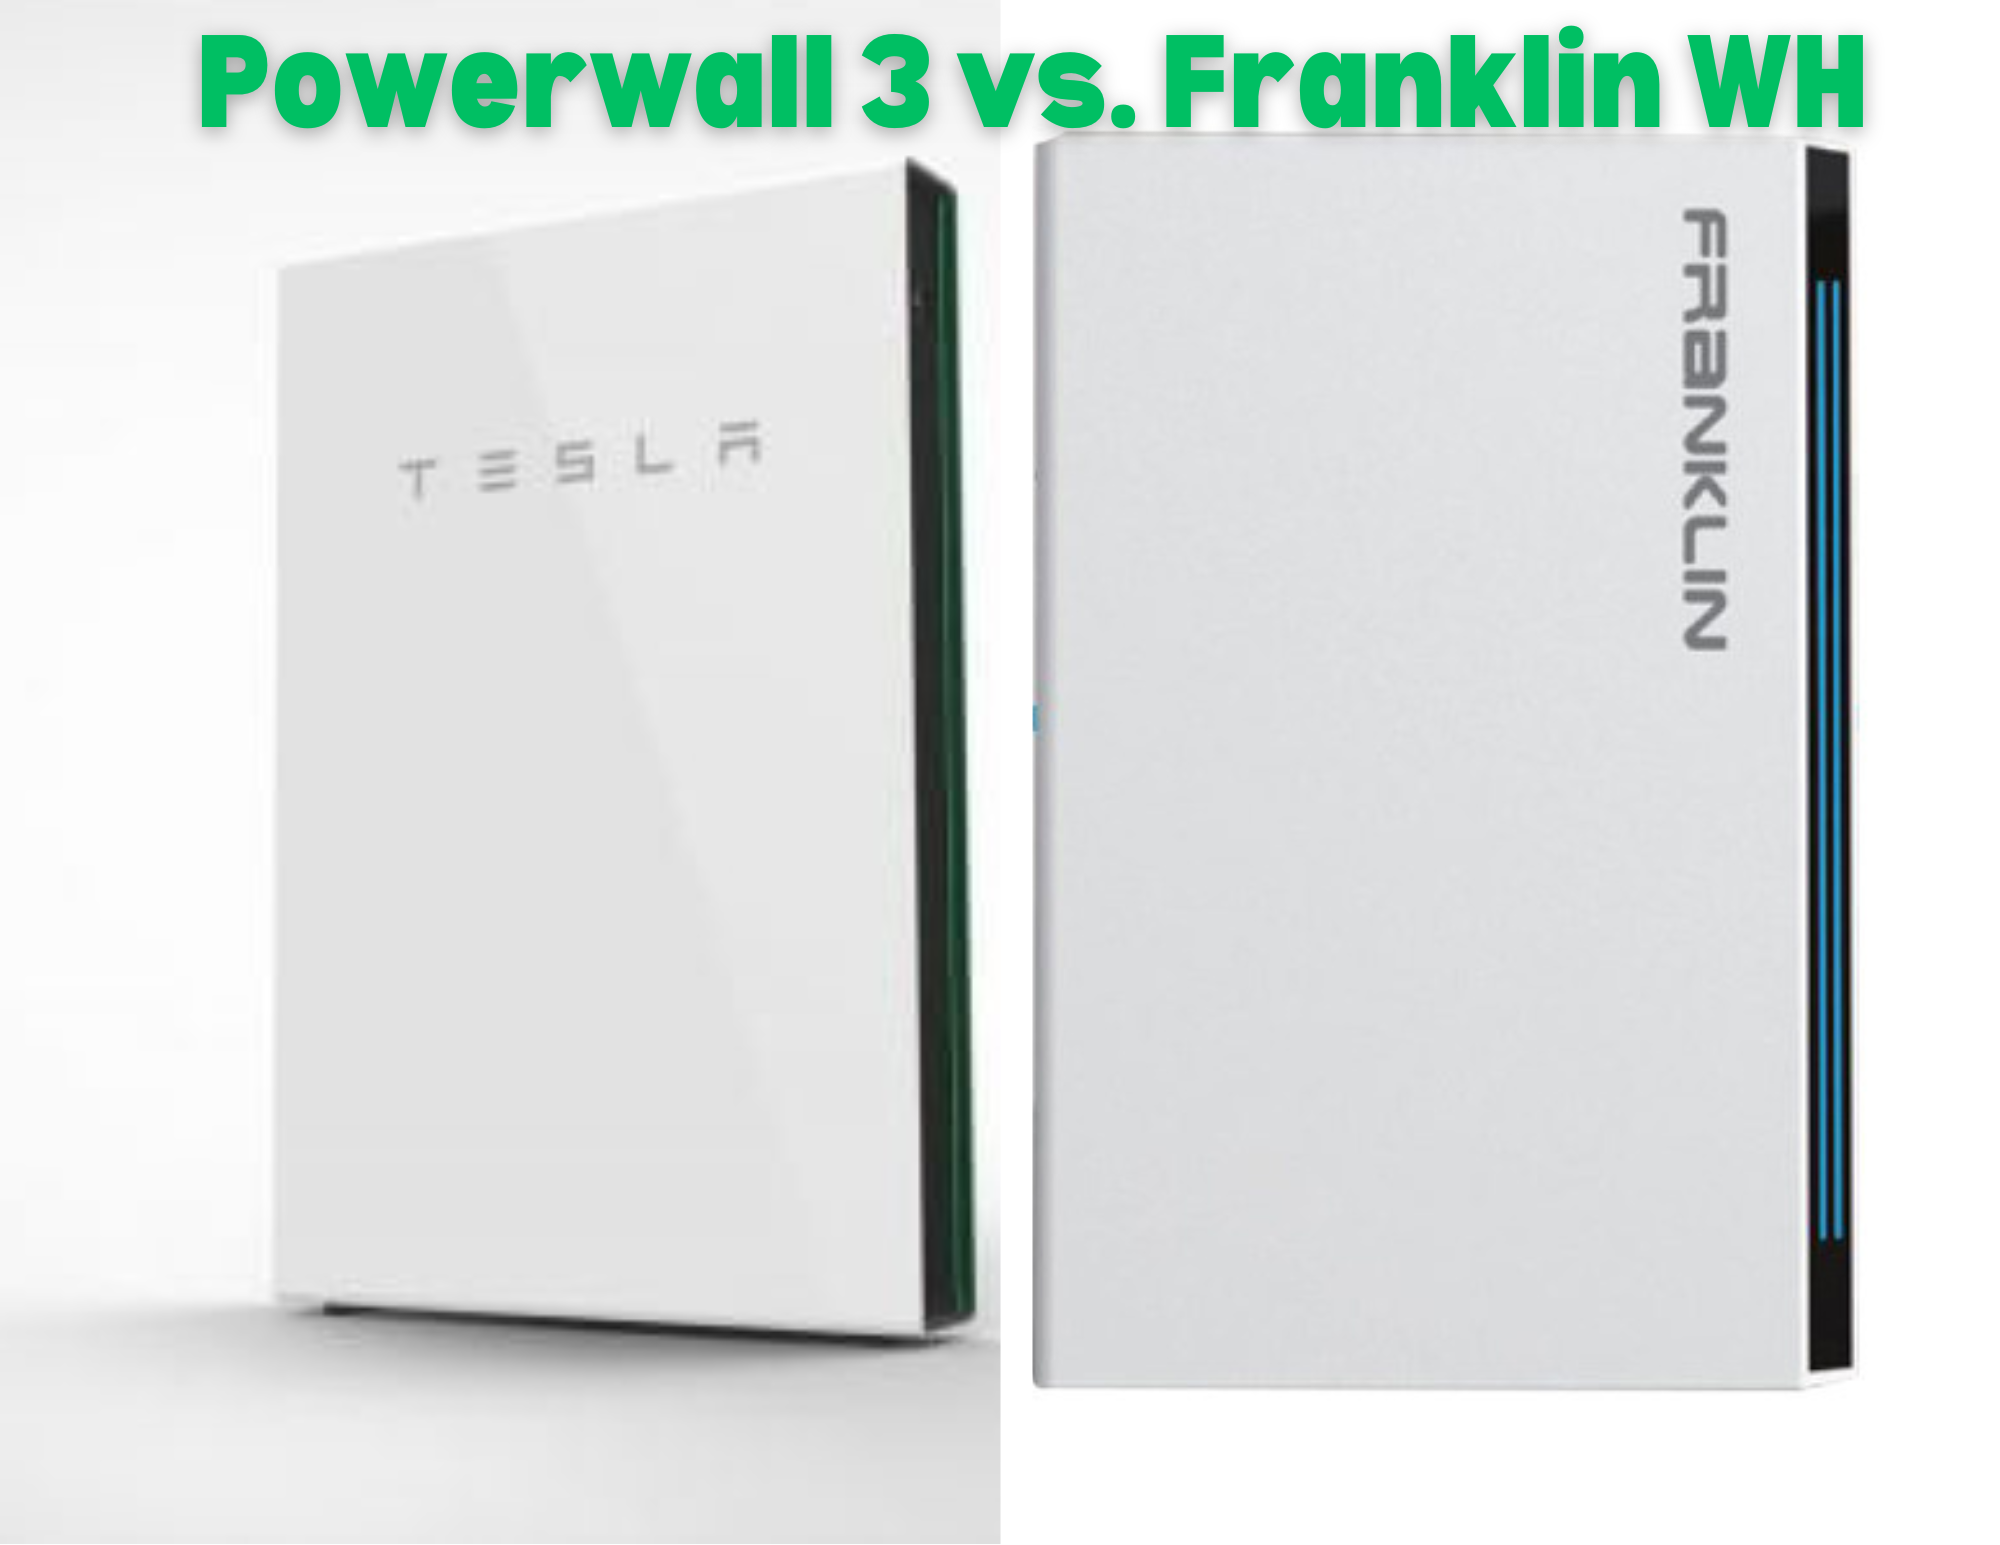 Powerwall 3 vs. FranklinWH: The Complete Comparison